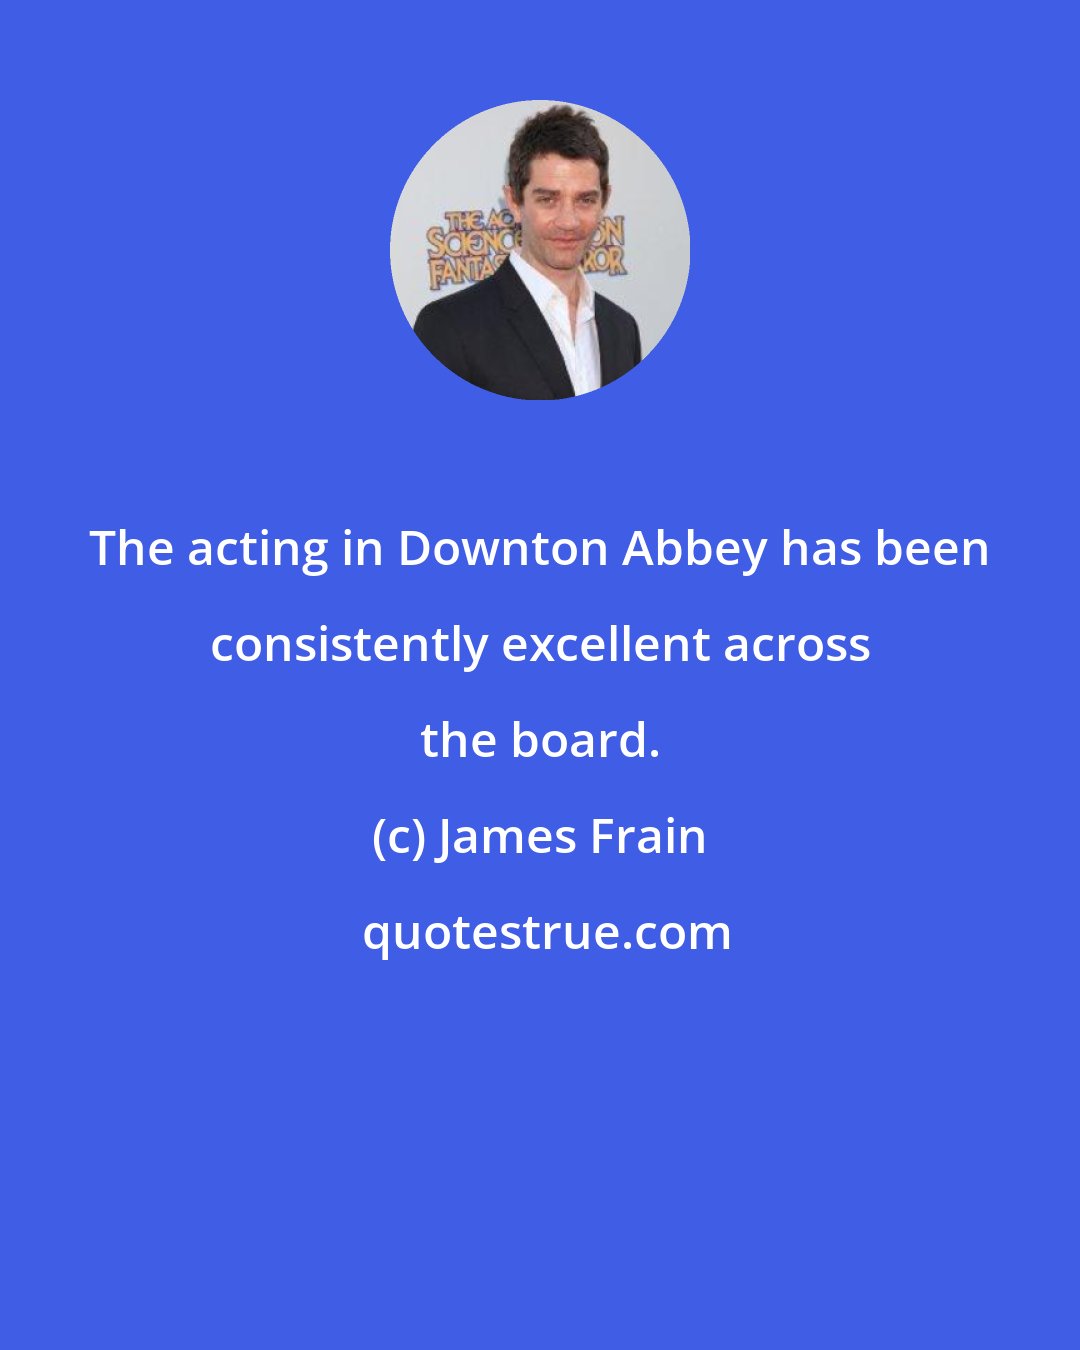 James Frain: The acting in Downton Abbey has been consistently excellent across the board.